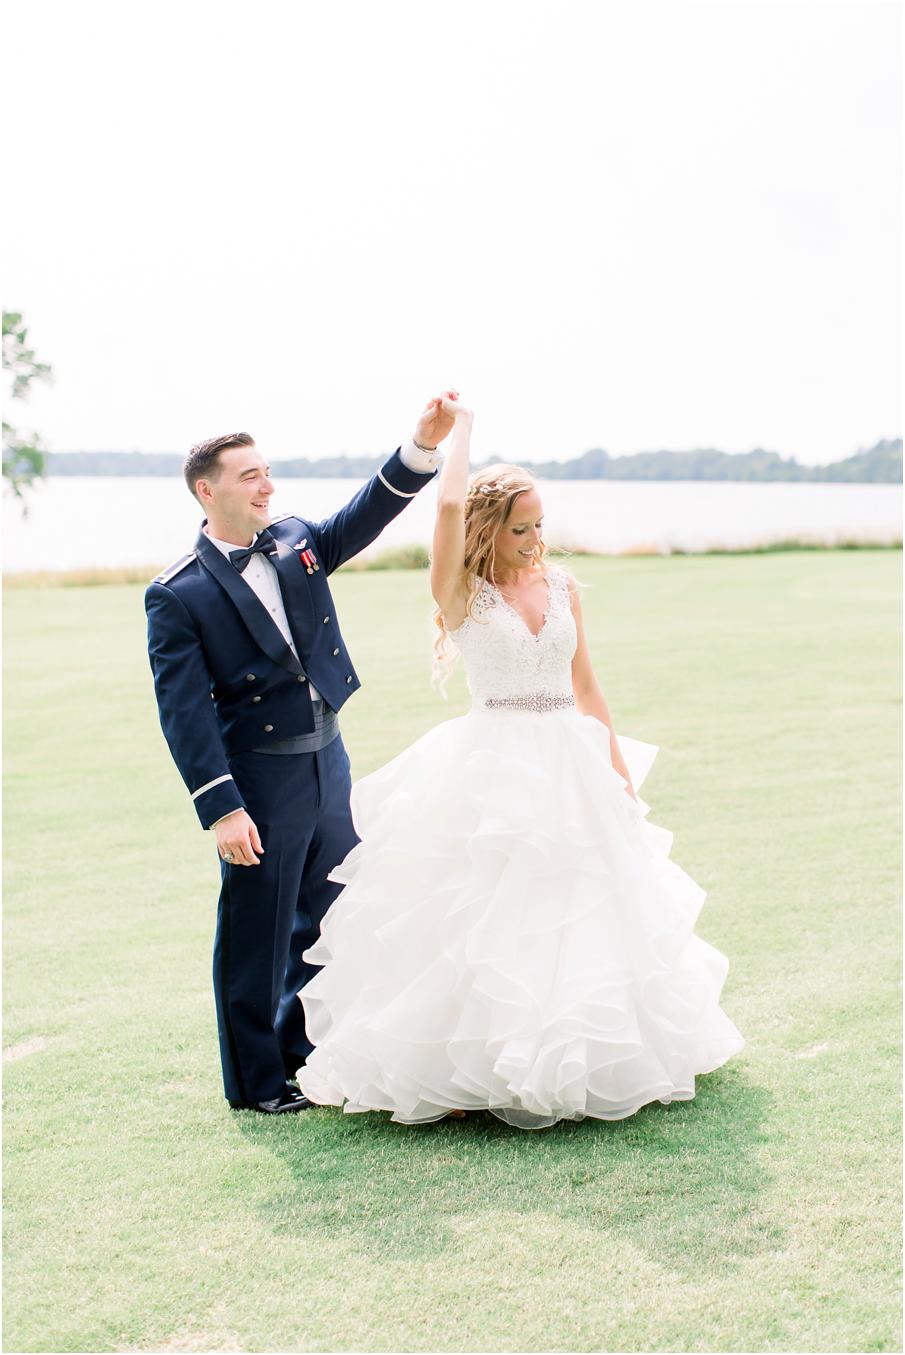 Groom twirls bride during their first look at Two Rivers Country Club. Groom in his military uniform and bride in ruffled, white wedding dress.